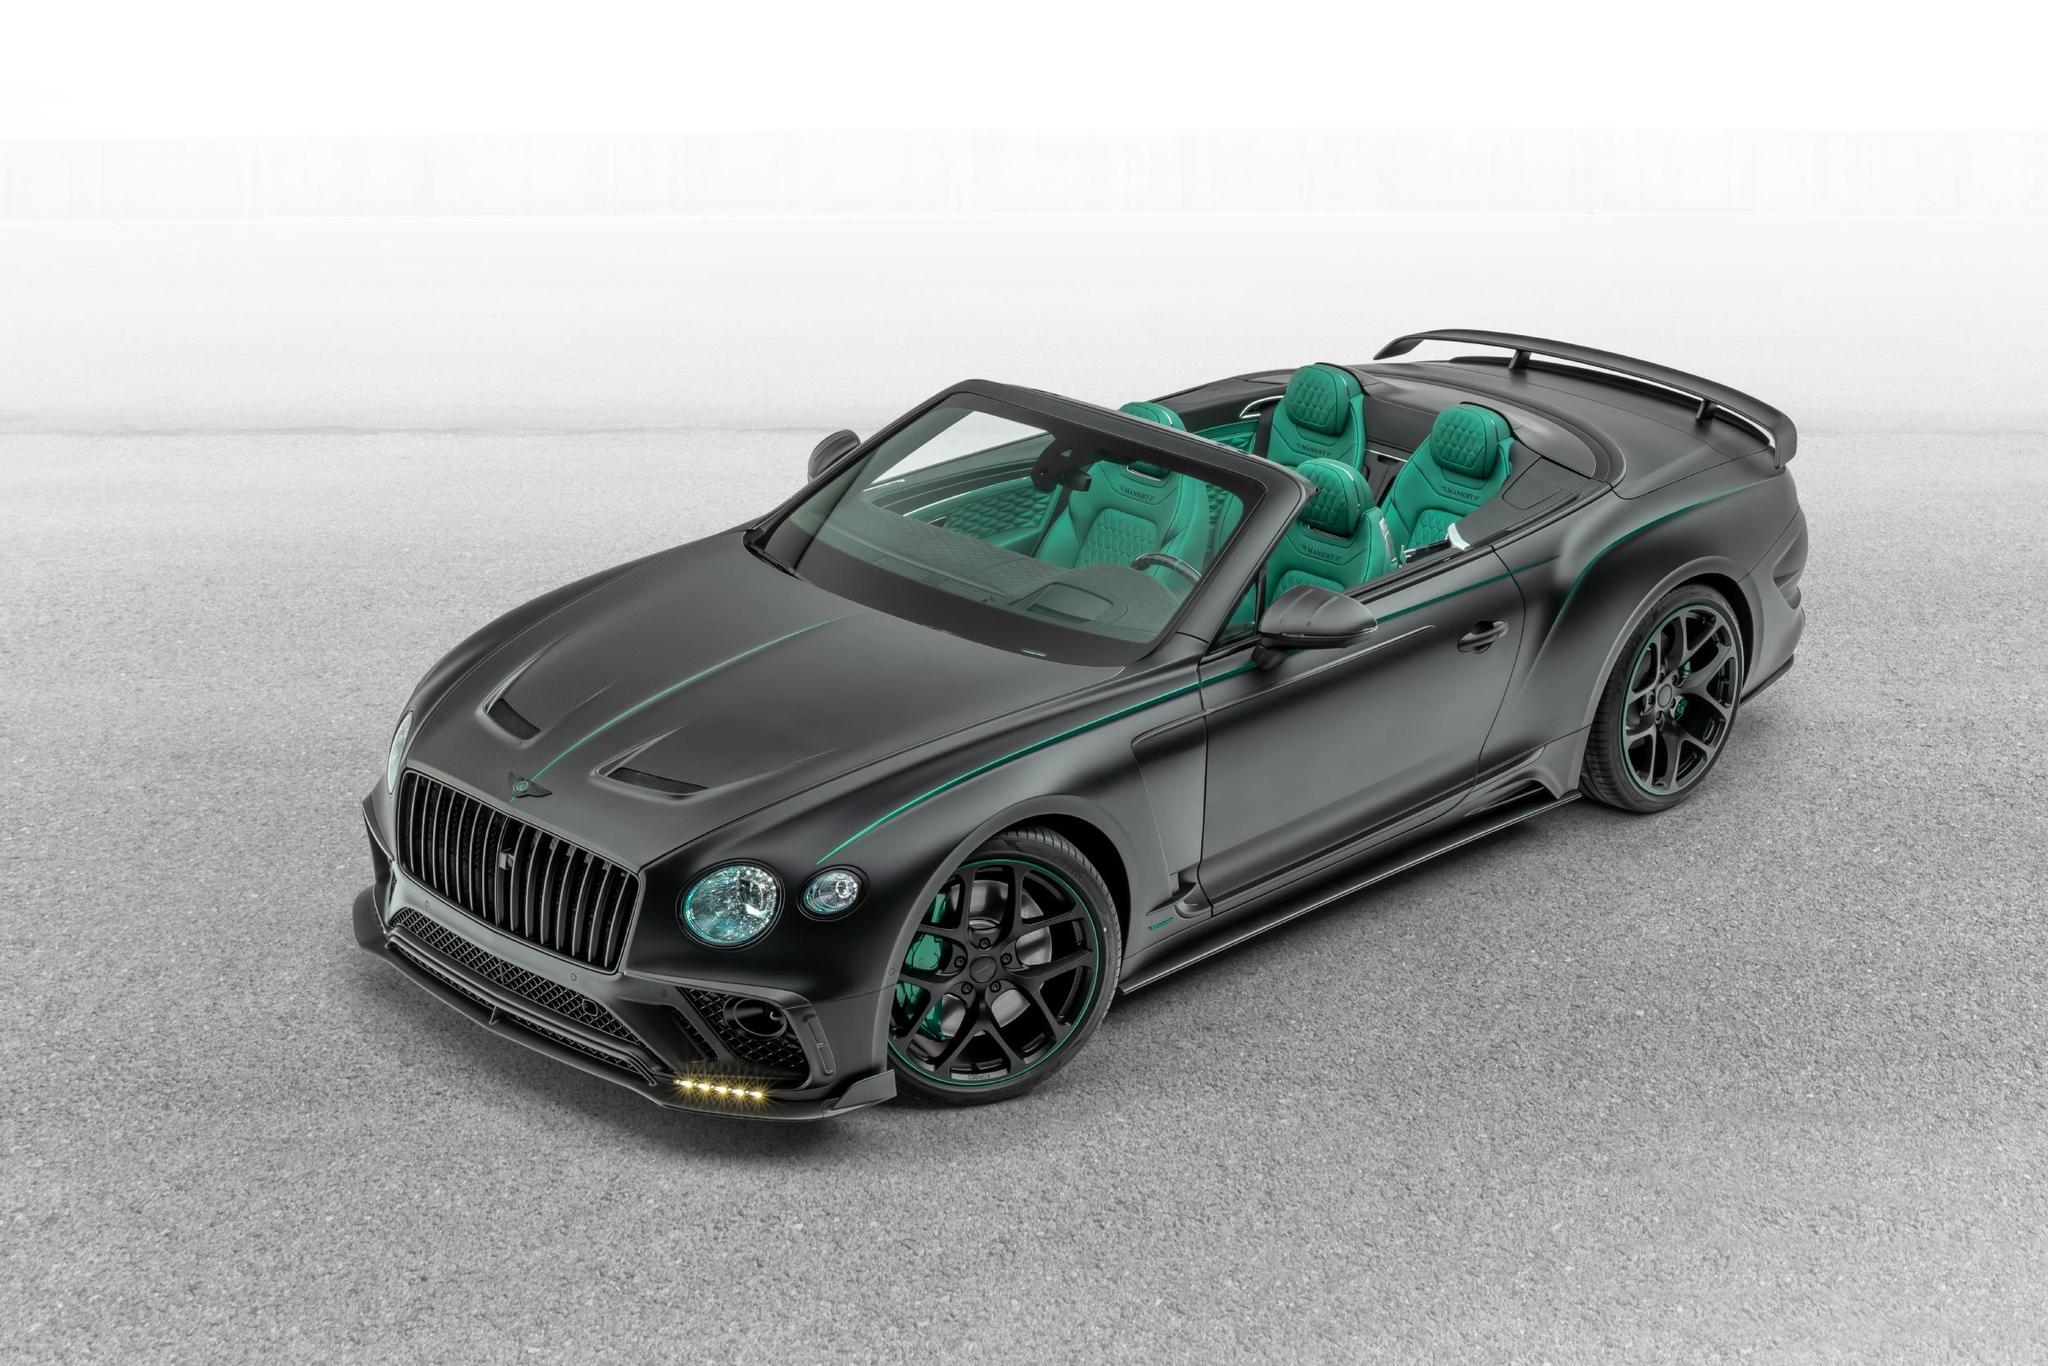 Mansory body kit for Bentley Continental GT new style